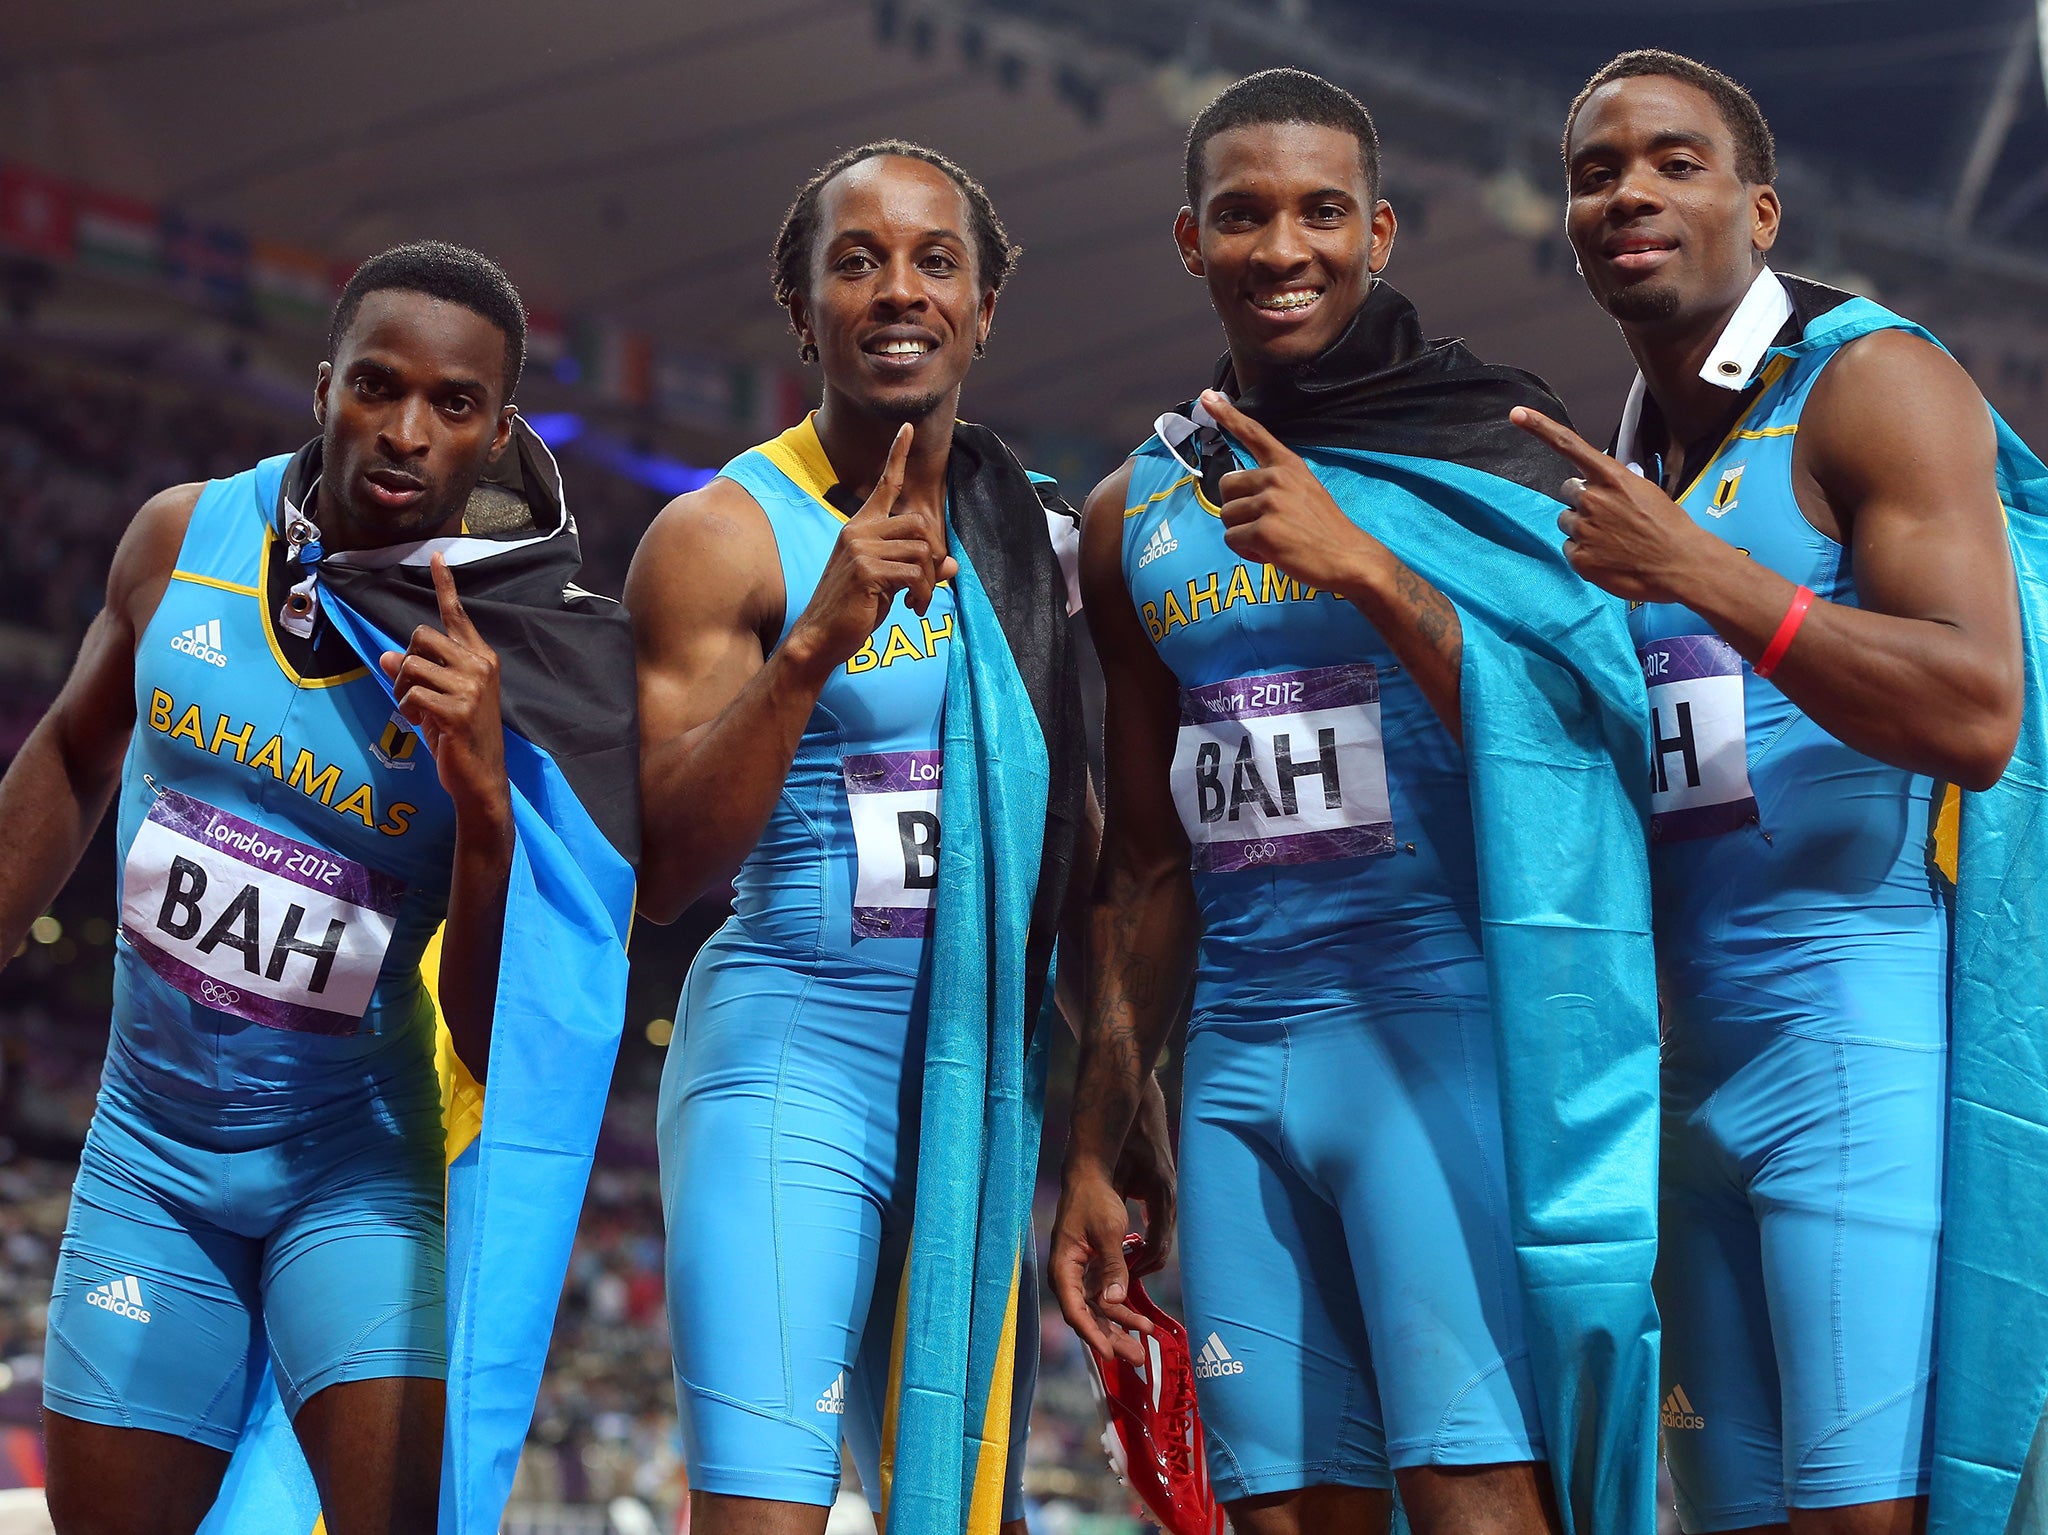 The Bahamas men's relay team celebrate victory at London 2012